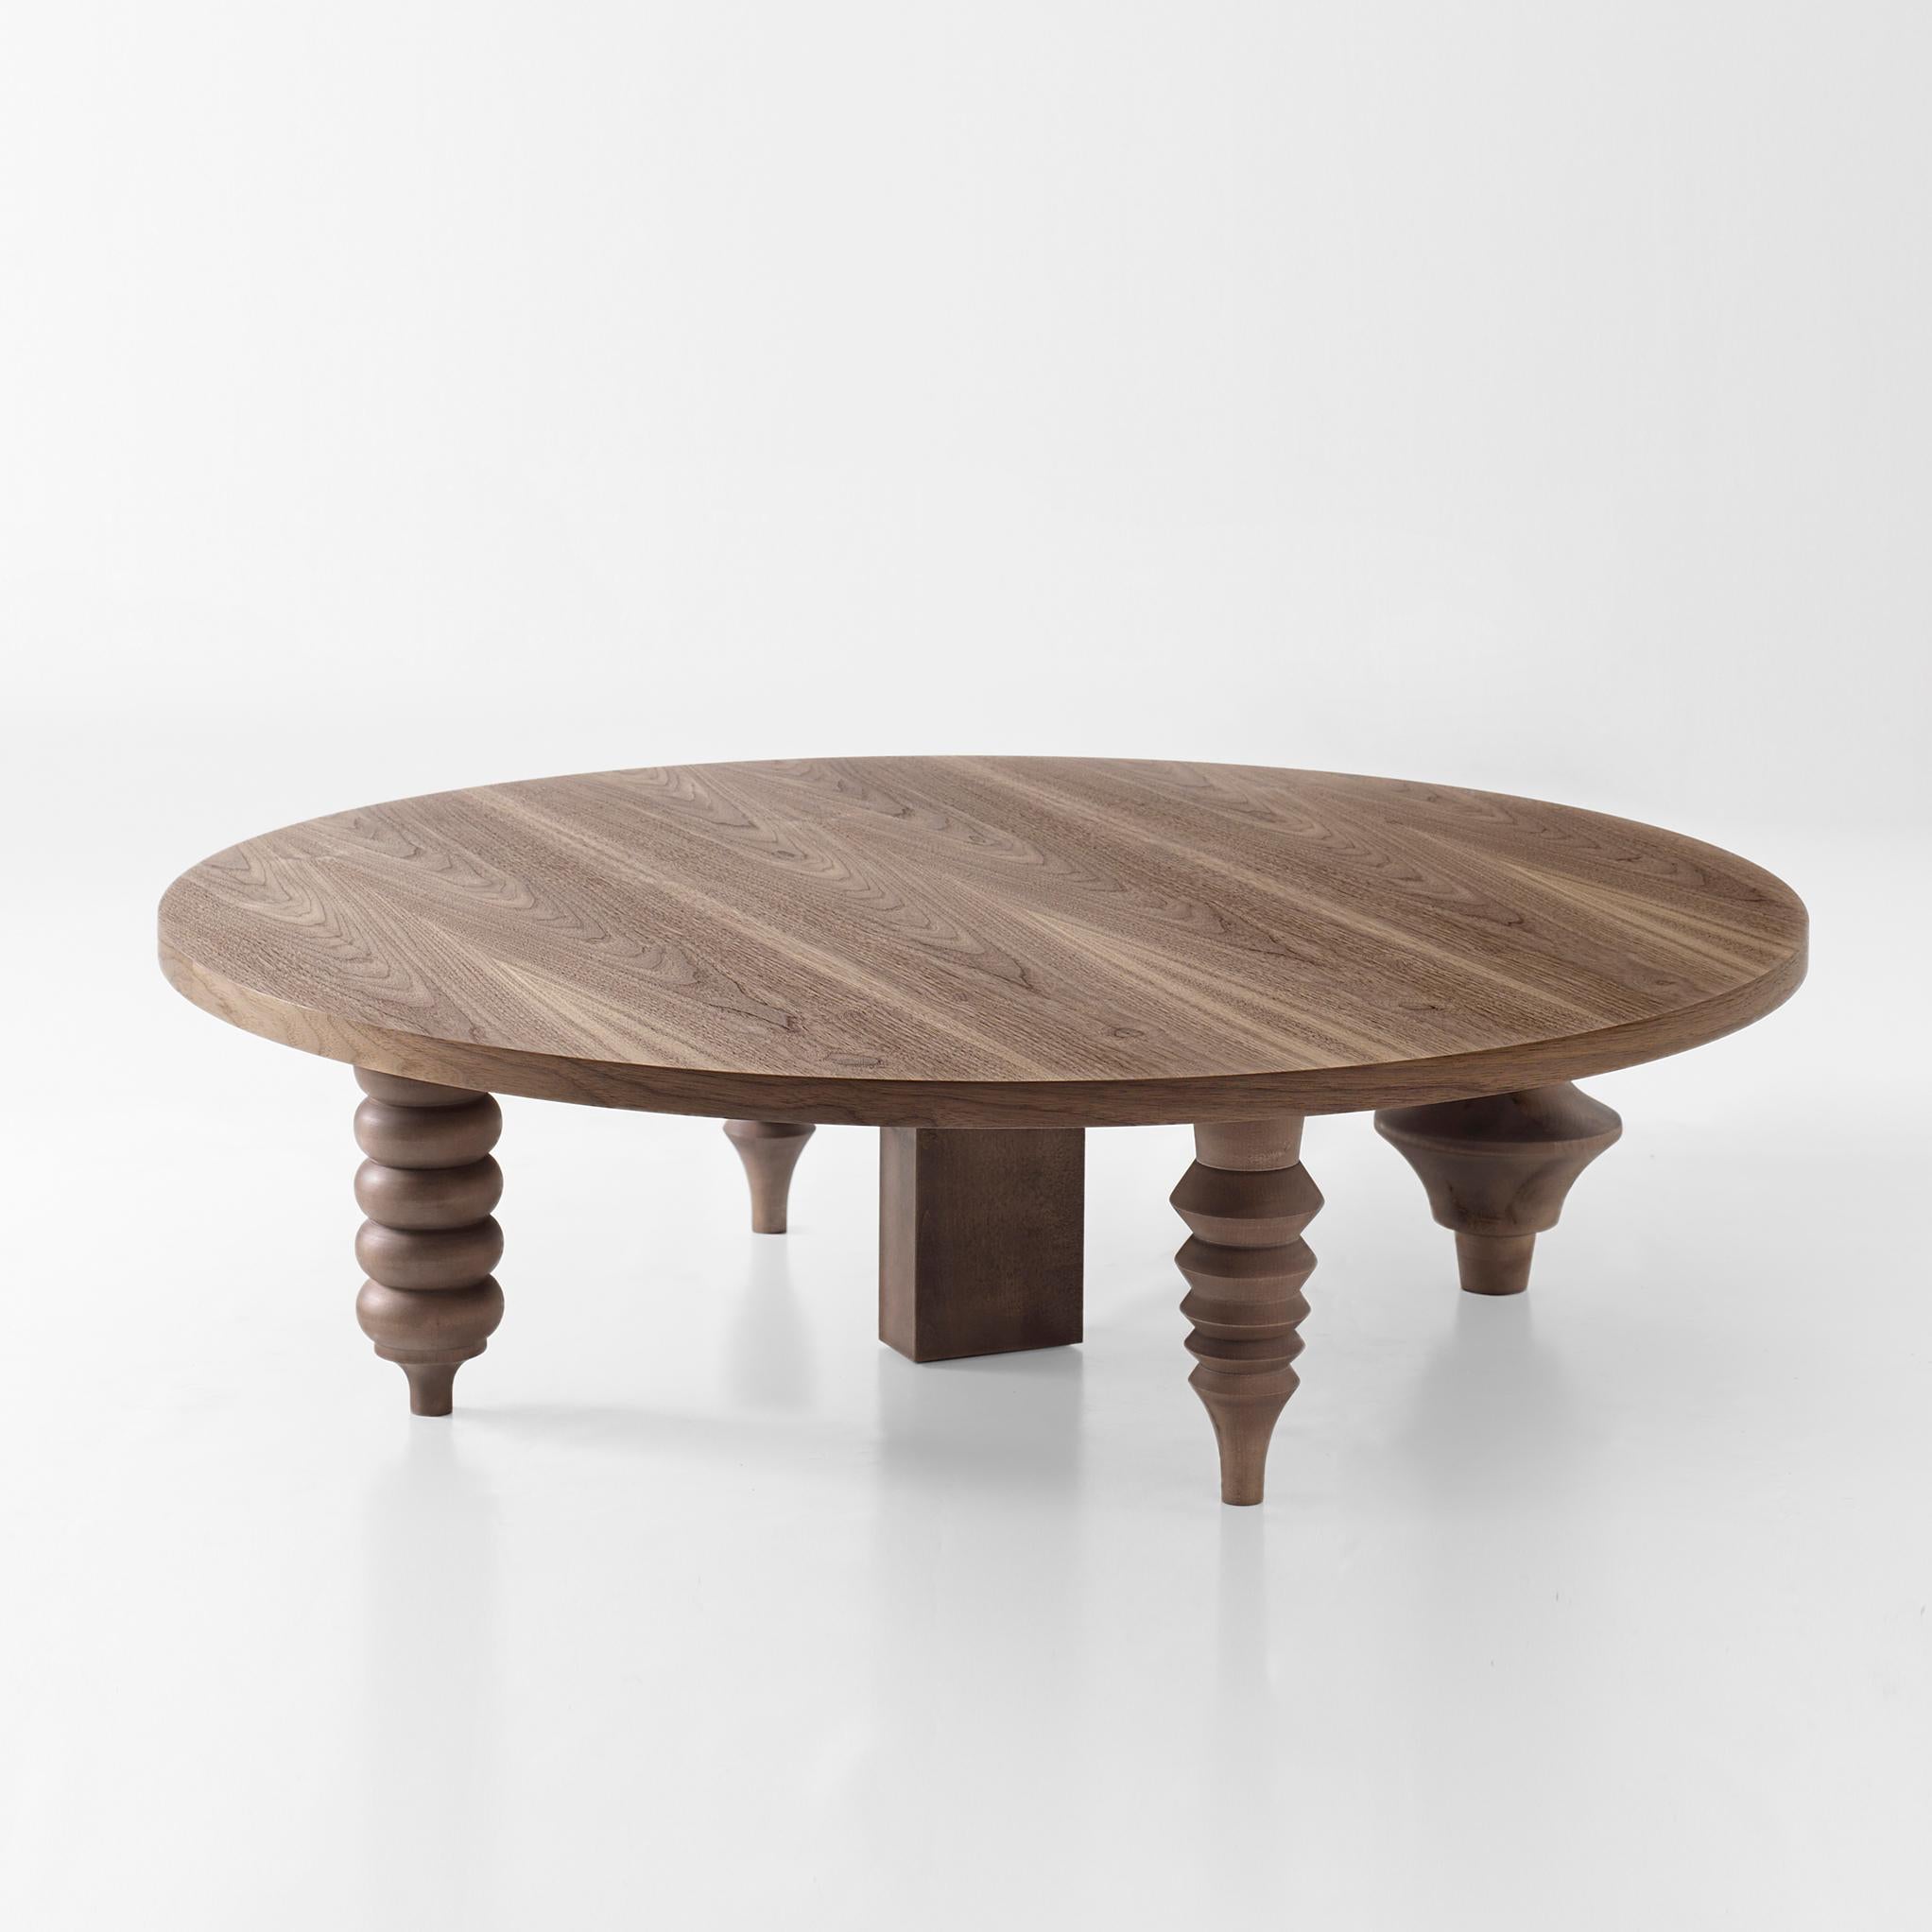 Contemporary Jaime Hayon Rounded Multi Leg Low Table by BD Barcelona For Sale